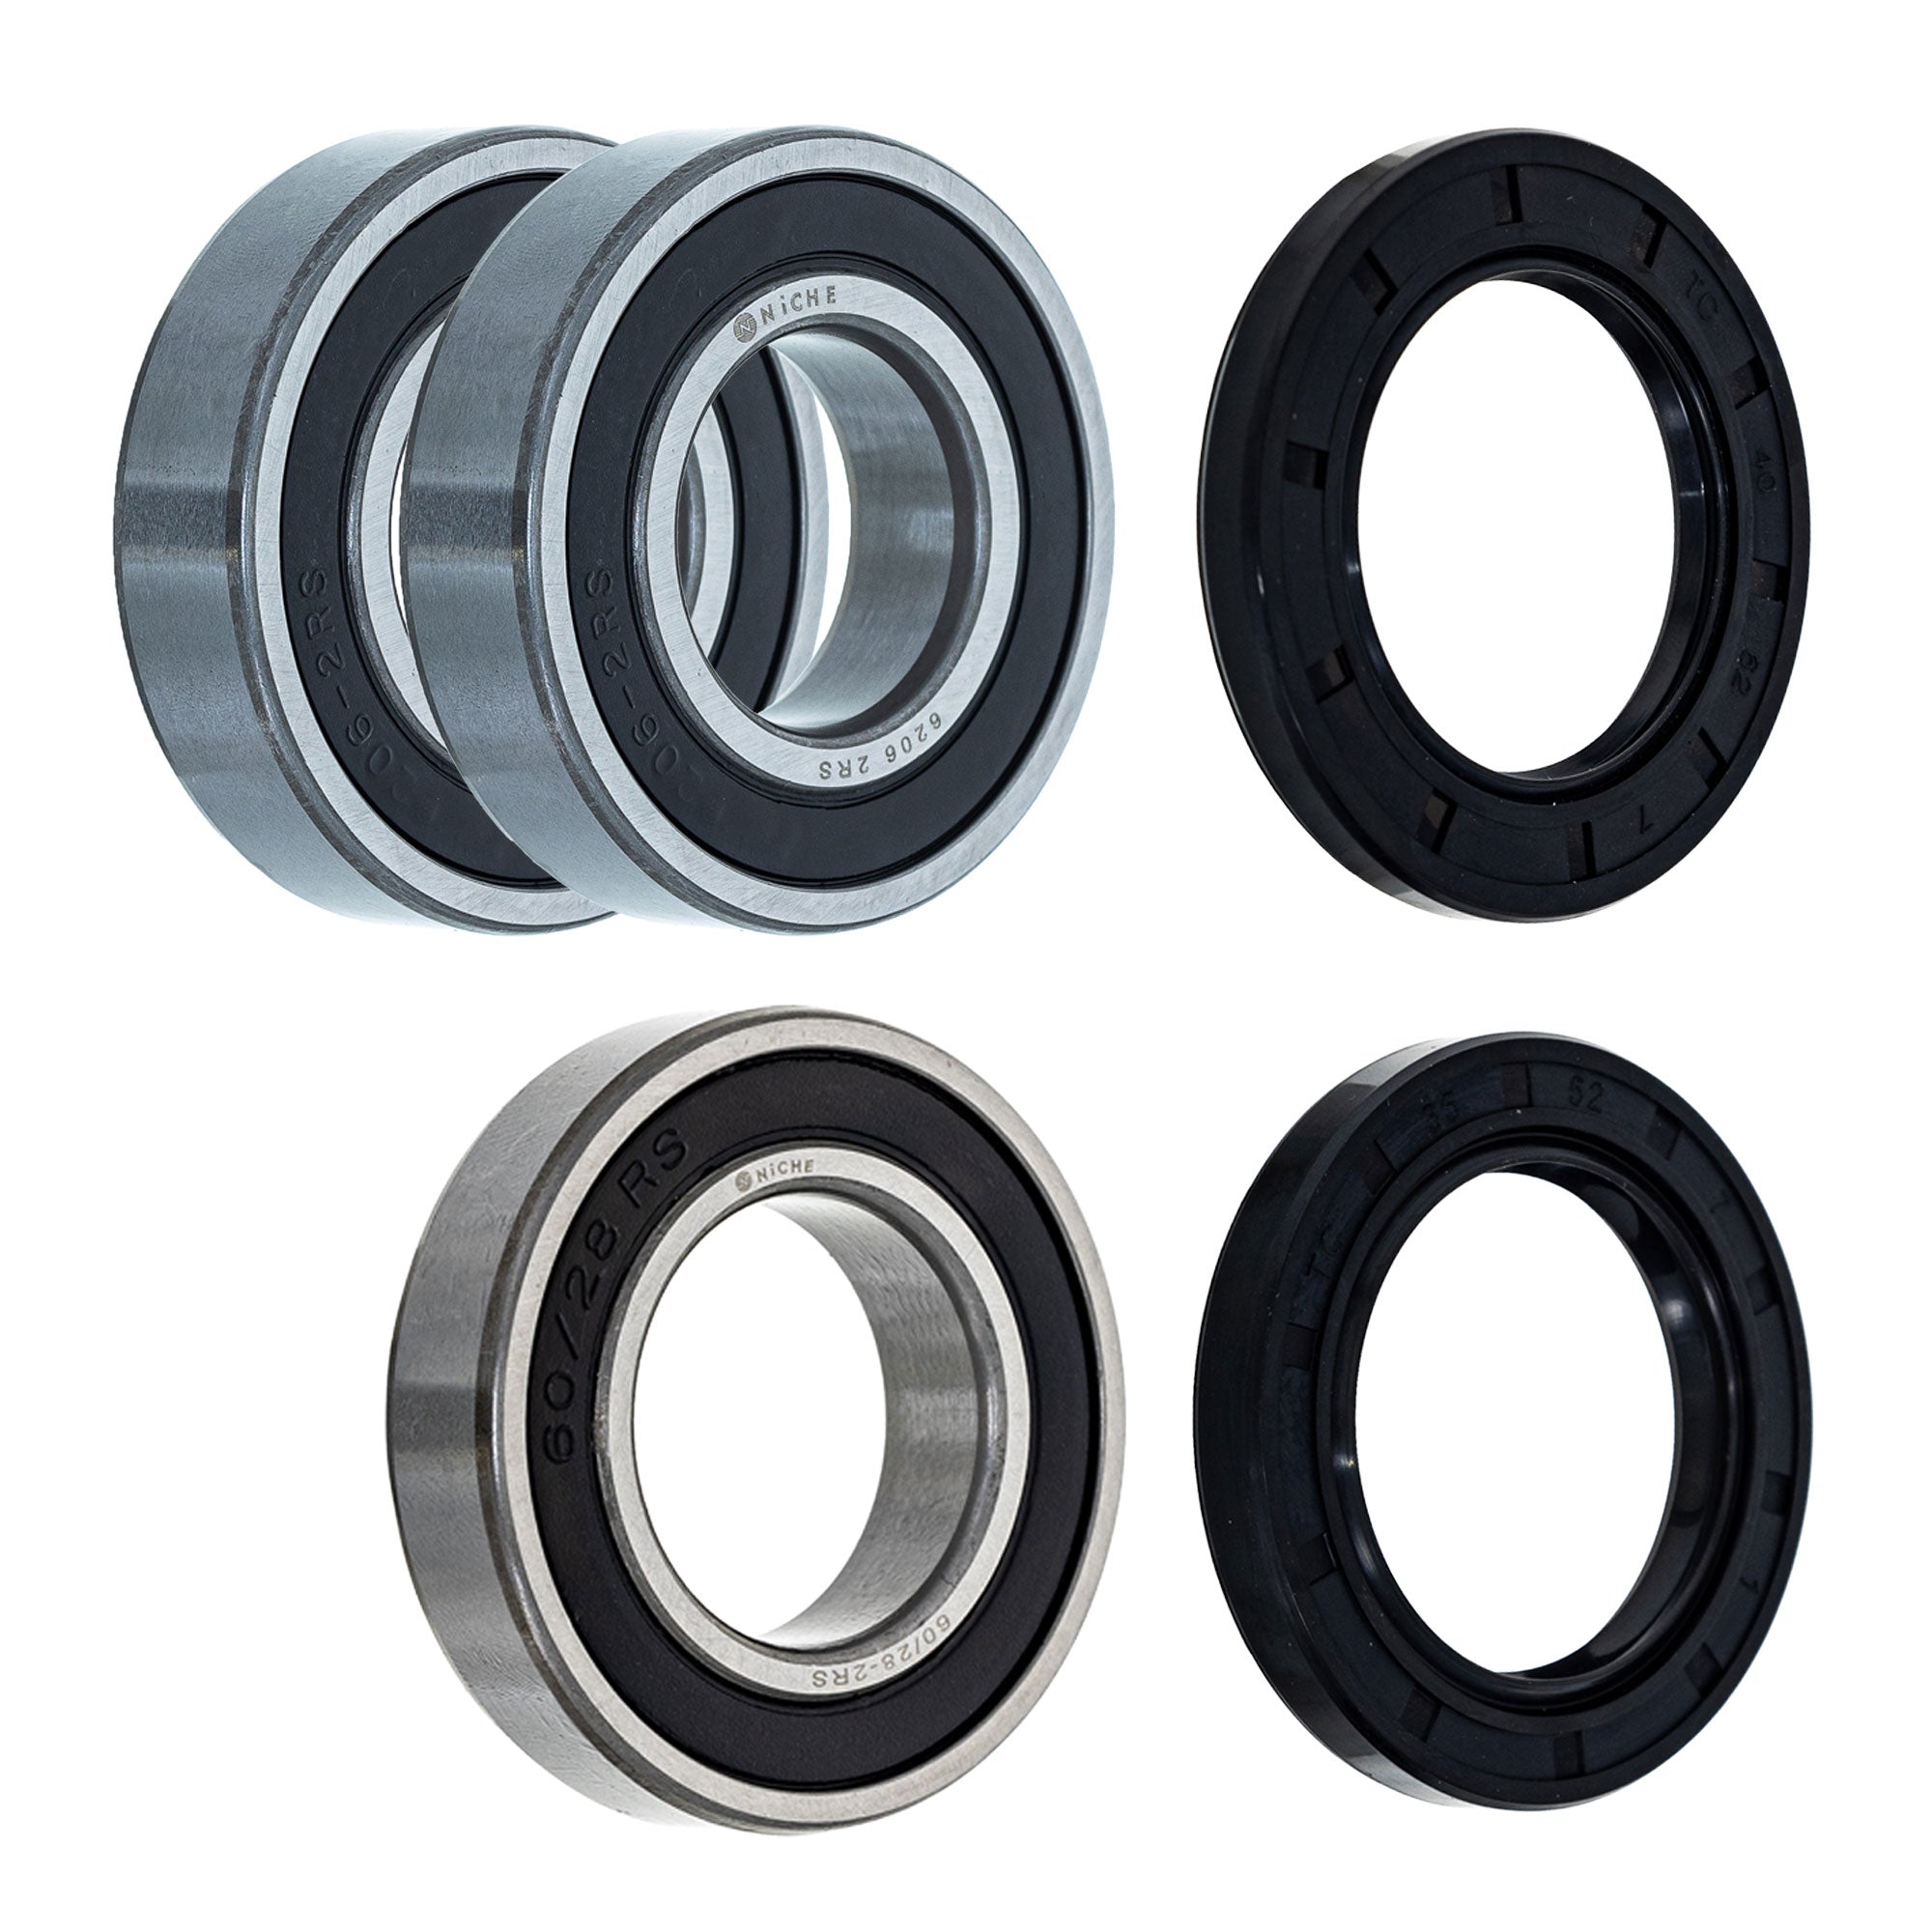 Wheel Bearing Seal Kit for zOTHER Ref No YZF1000 NICHE MK1008908